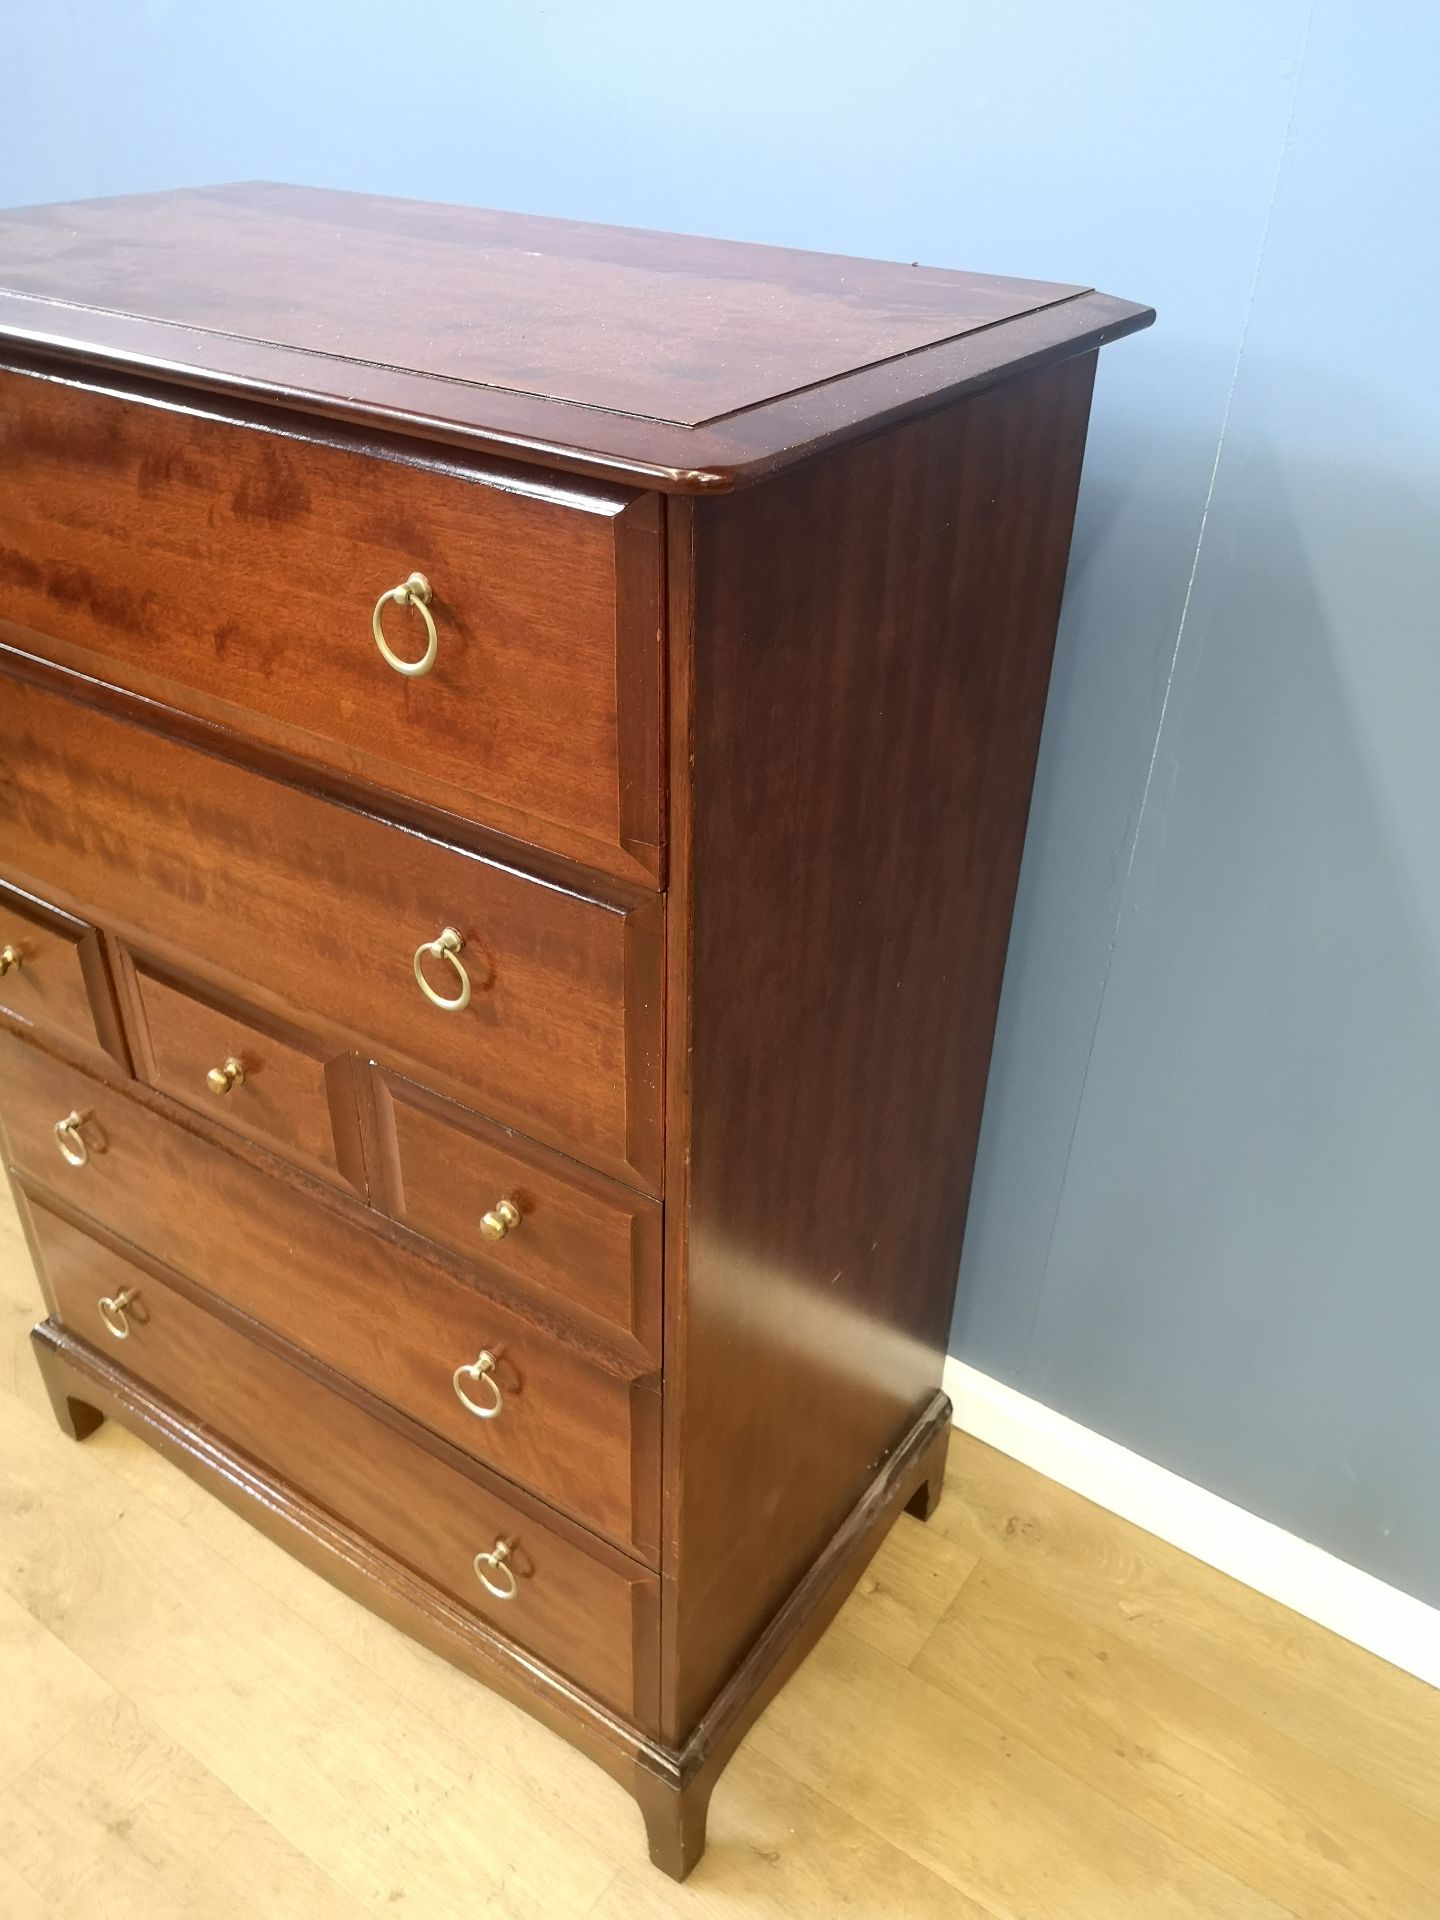 Stag chest of drawers - Image 4 of 6